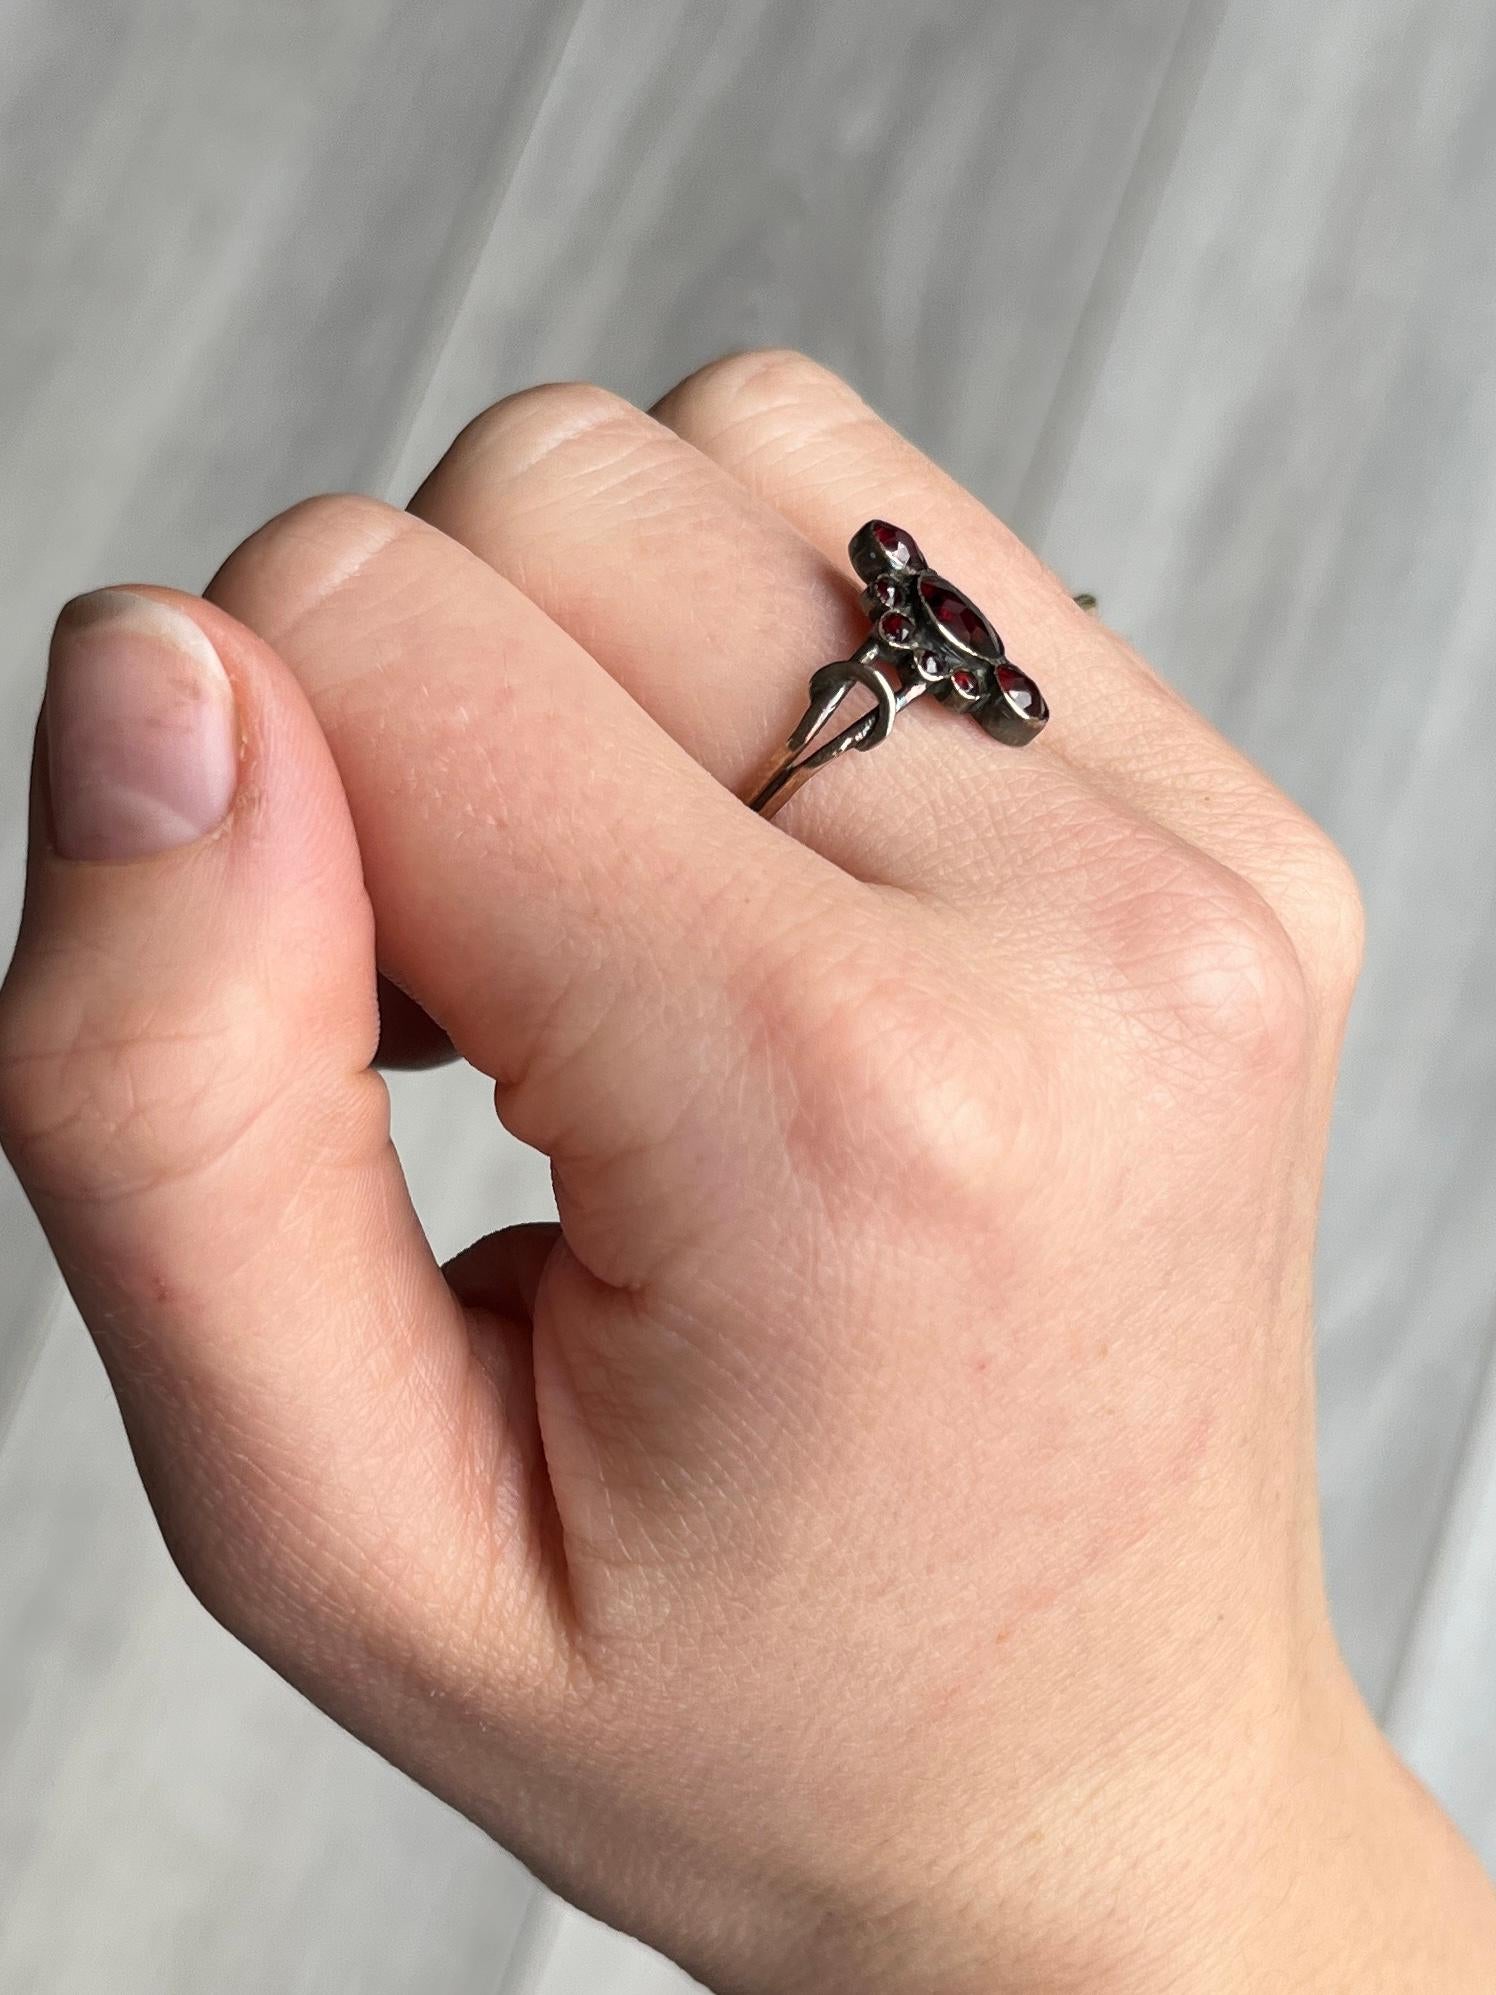 The victorian garnet stones in this navette cluster ring are a gorgeous deep red and are so glossy. Modelled in 9carat gold with decorative shoulders. 

Ring Size: Q or 8 
Cluster Dimensionsr: 15x11mm 

Weight: 1.6g